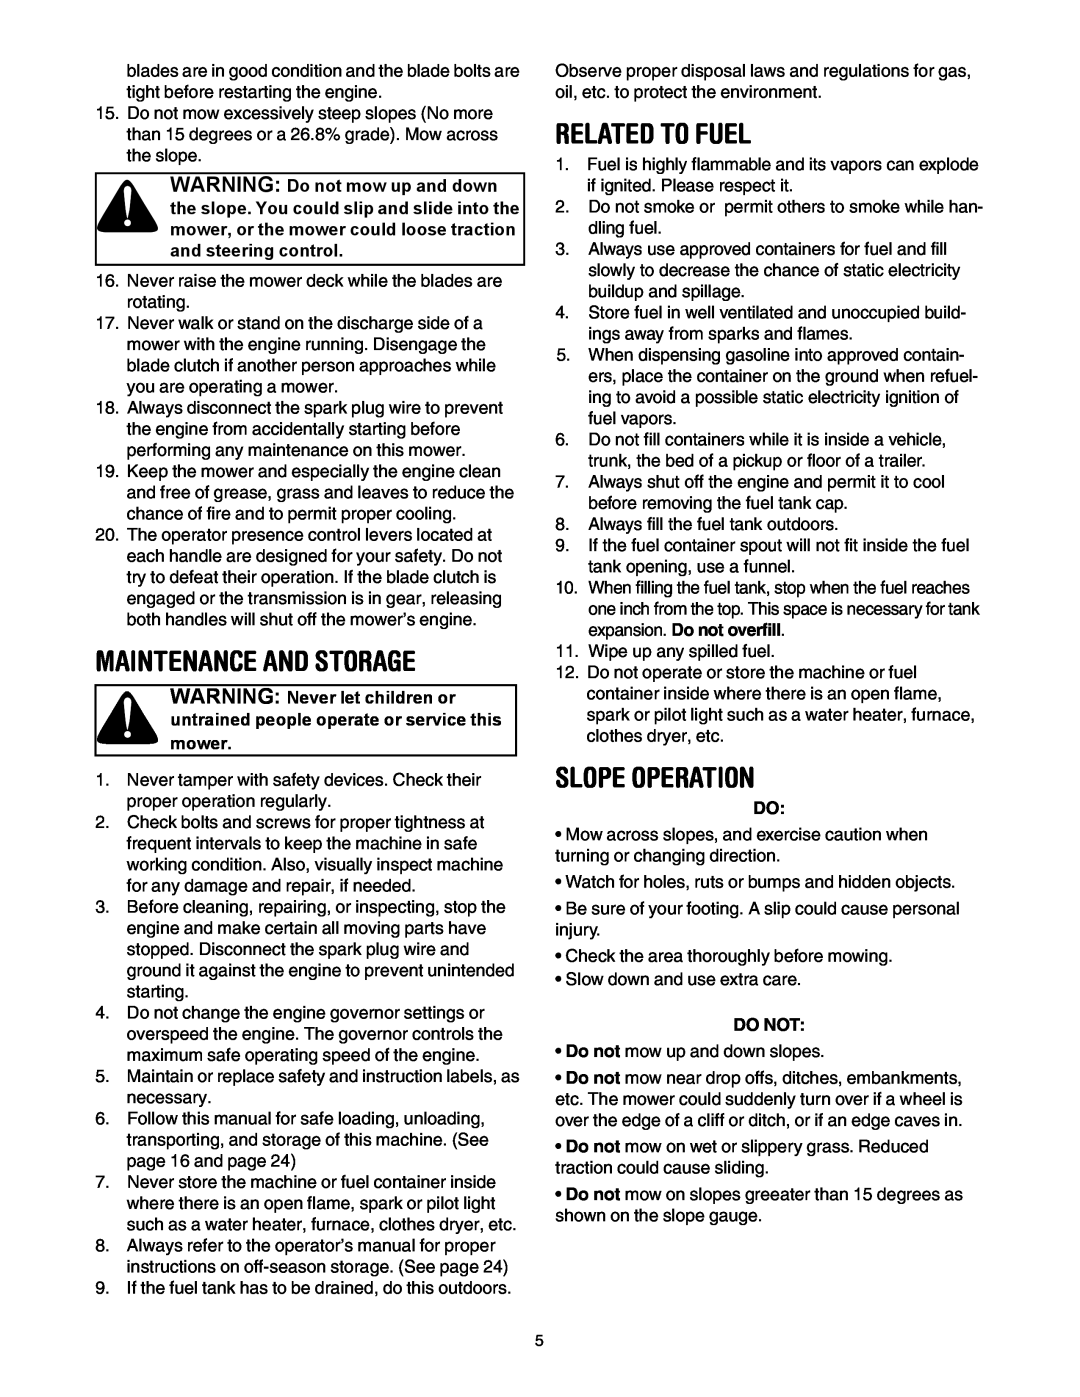 Cub Cadet G 1236 service manual Maintenance And Storage, Related To Fuel, Slope Operation, Do Not 